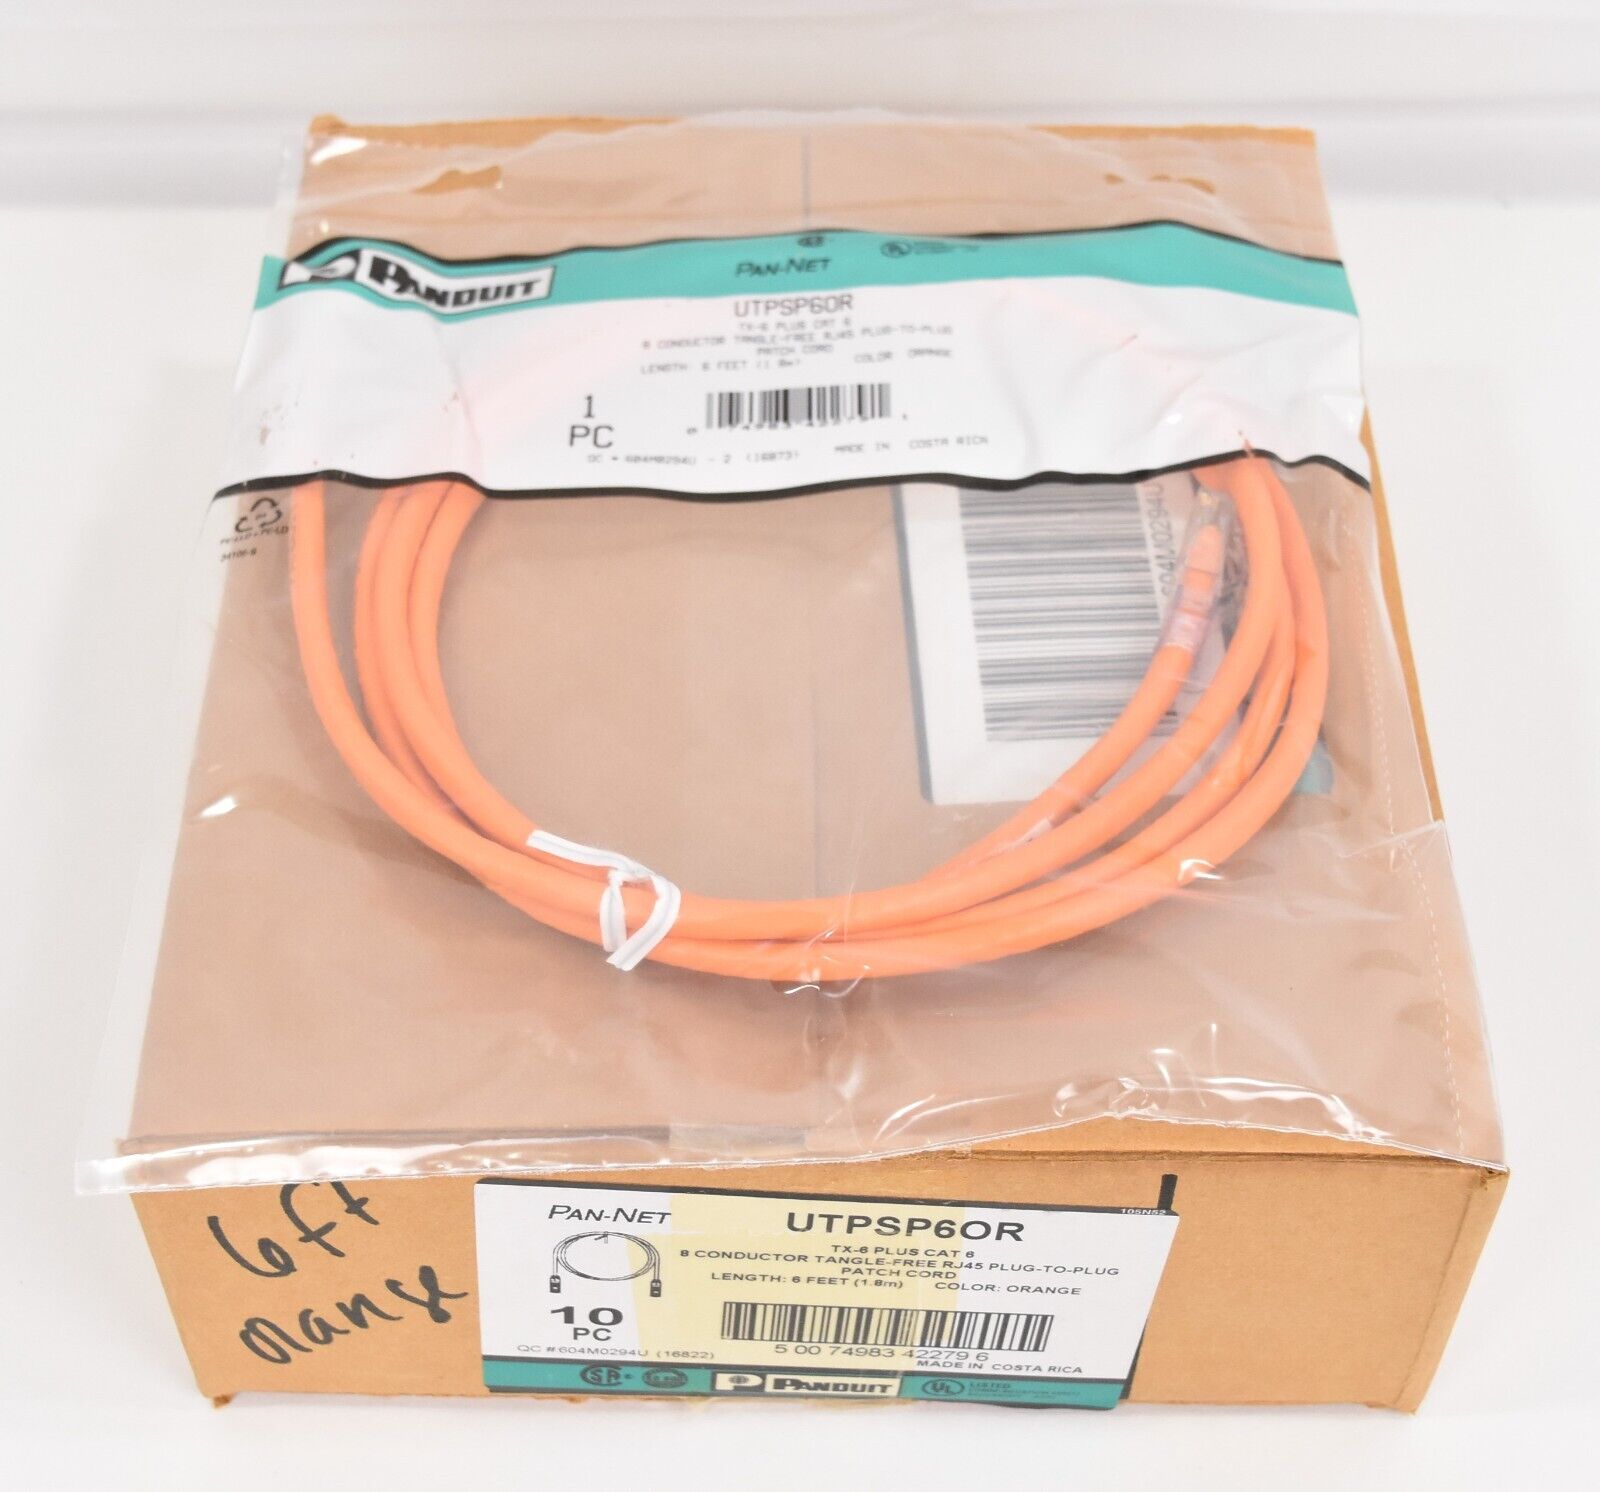 Box of (10) Panduit 6 Ft Orange RJ45 Cat 6 Ethernet Patch Cord Cables UTPSP6OR